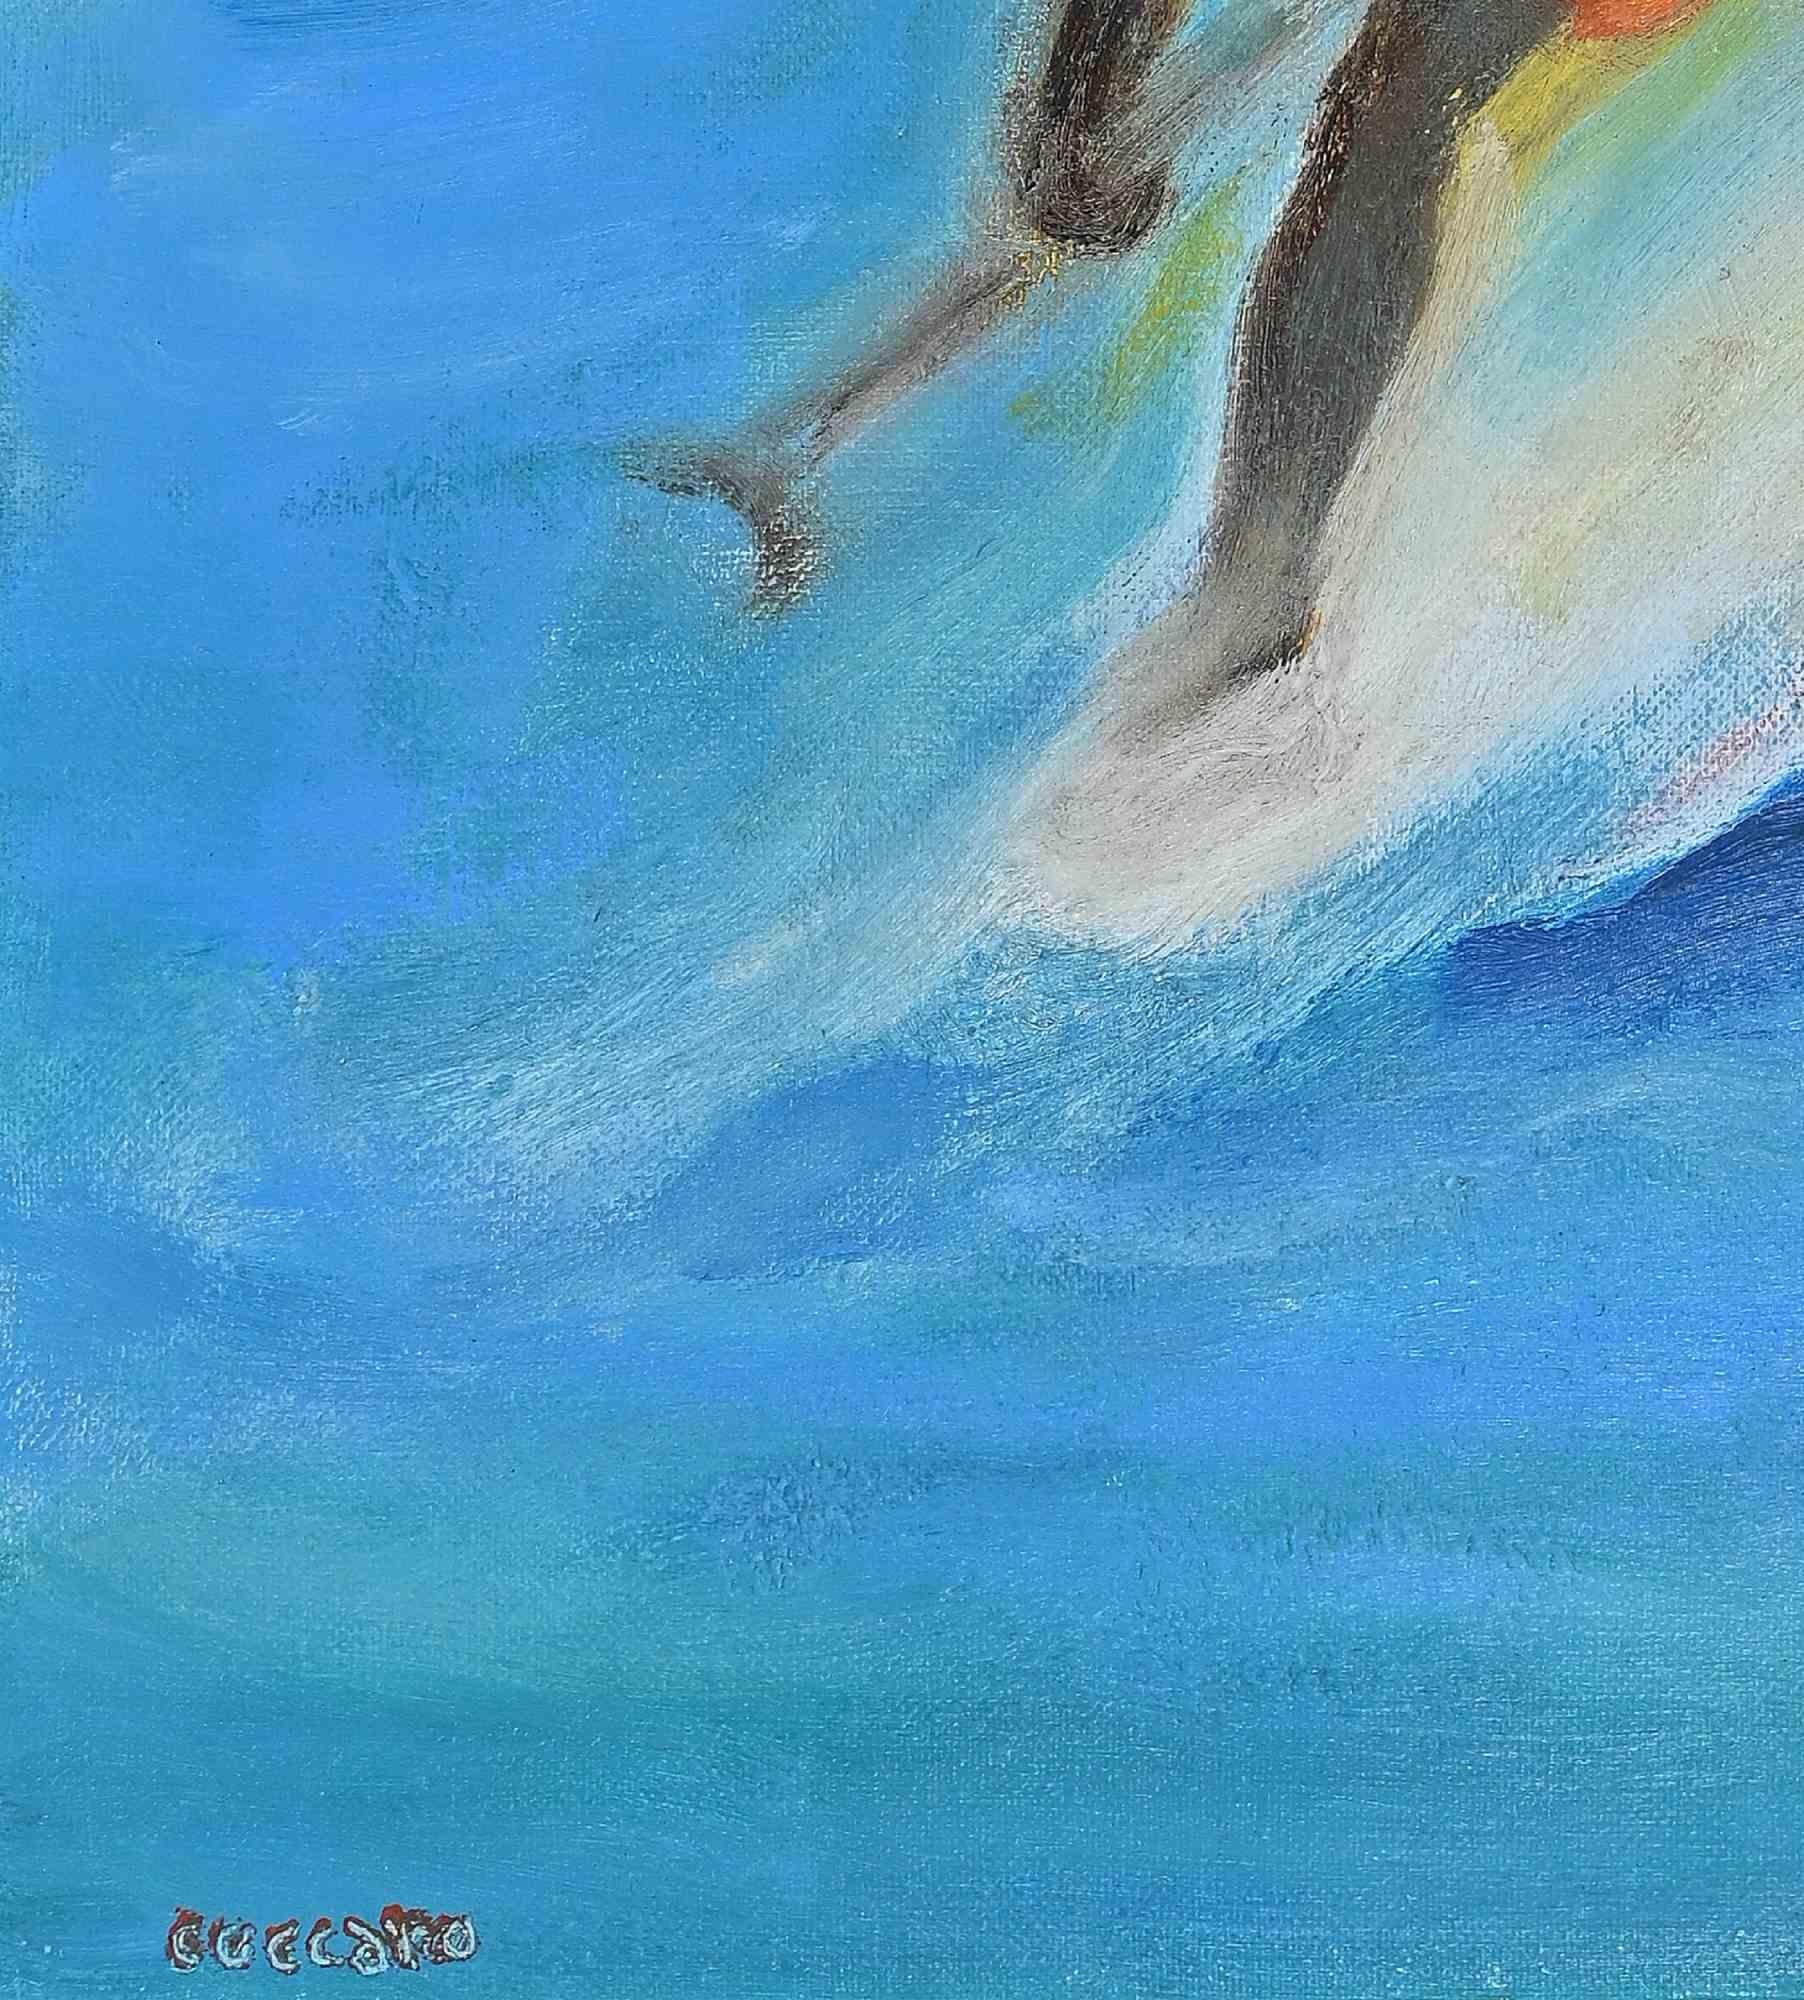 The Surfer is an original Contemporary Artwork realized in the 20th Century by Roberto Cuccaro. 

Original Oil Painting on Canvas.

Hand-signed on the lower left corner: Cuccaro.

Hand-signed on the back too.

Mint Conditions.

Roberto Cuccaro.